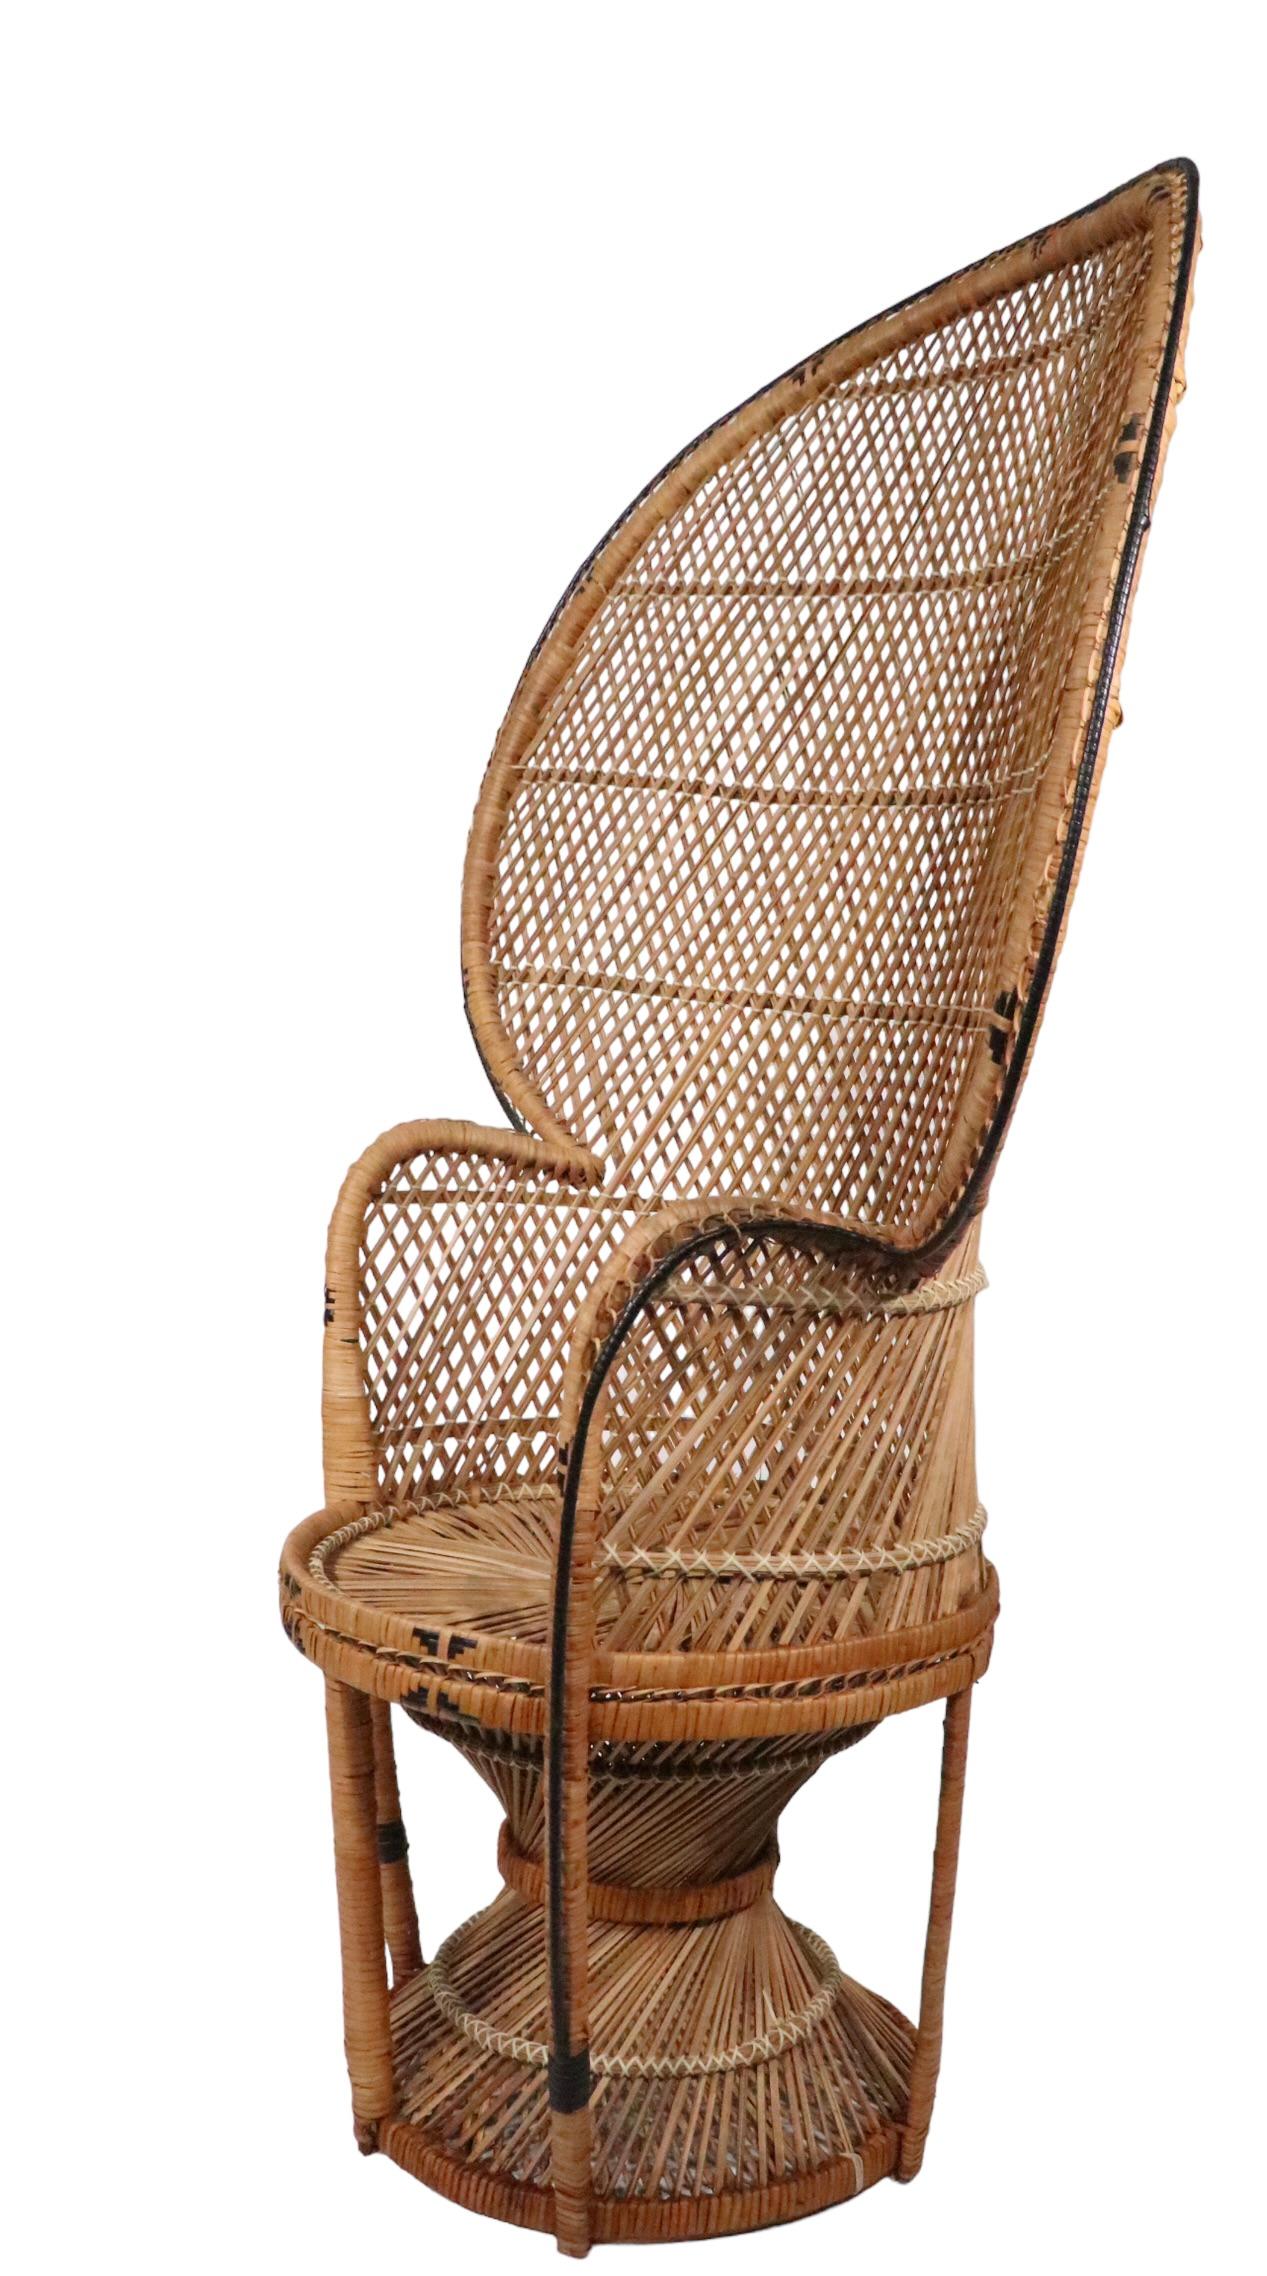 Emmanuelle  Peacock Bamboo Wicker Fan Chair c. 1960/1970's In Good Condition For Sale In New York, NY